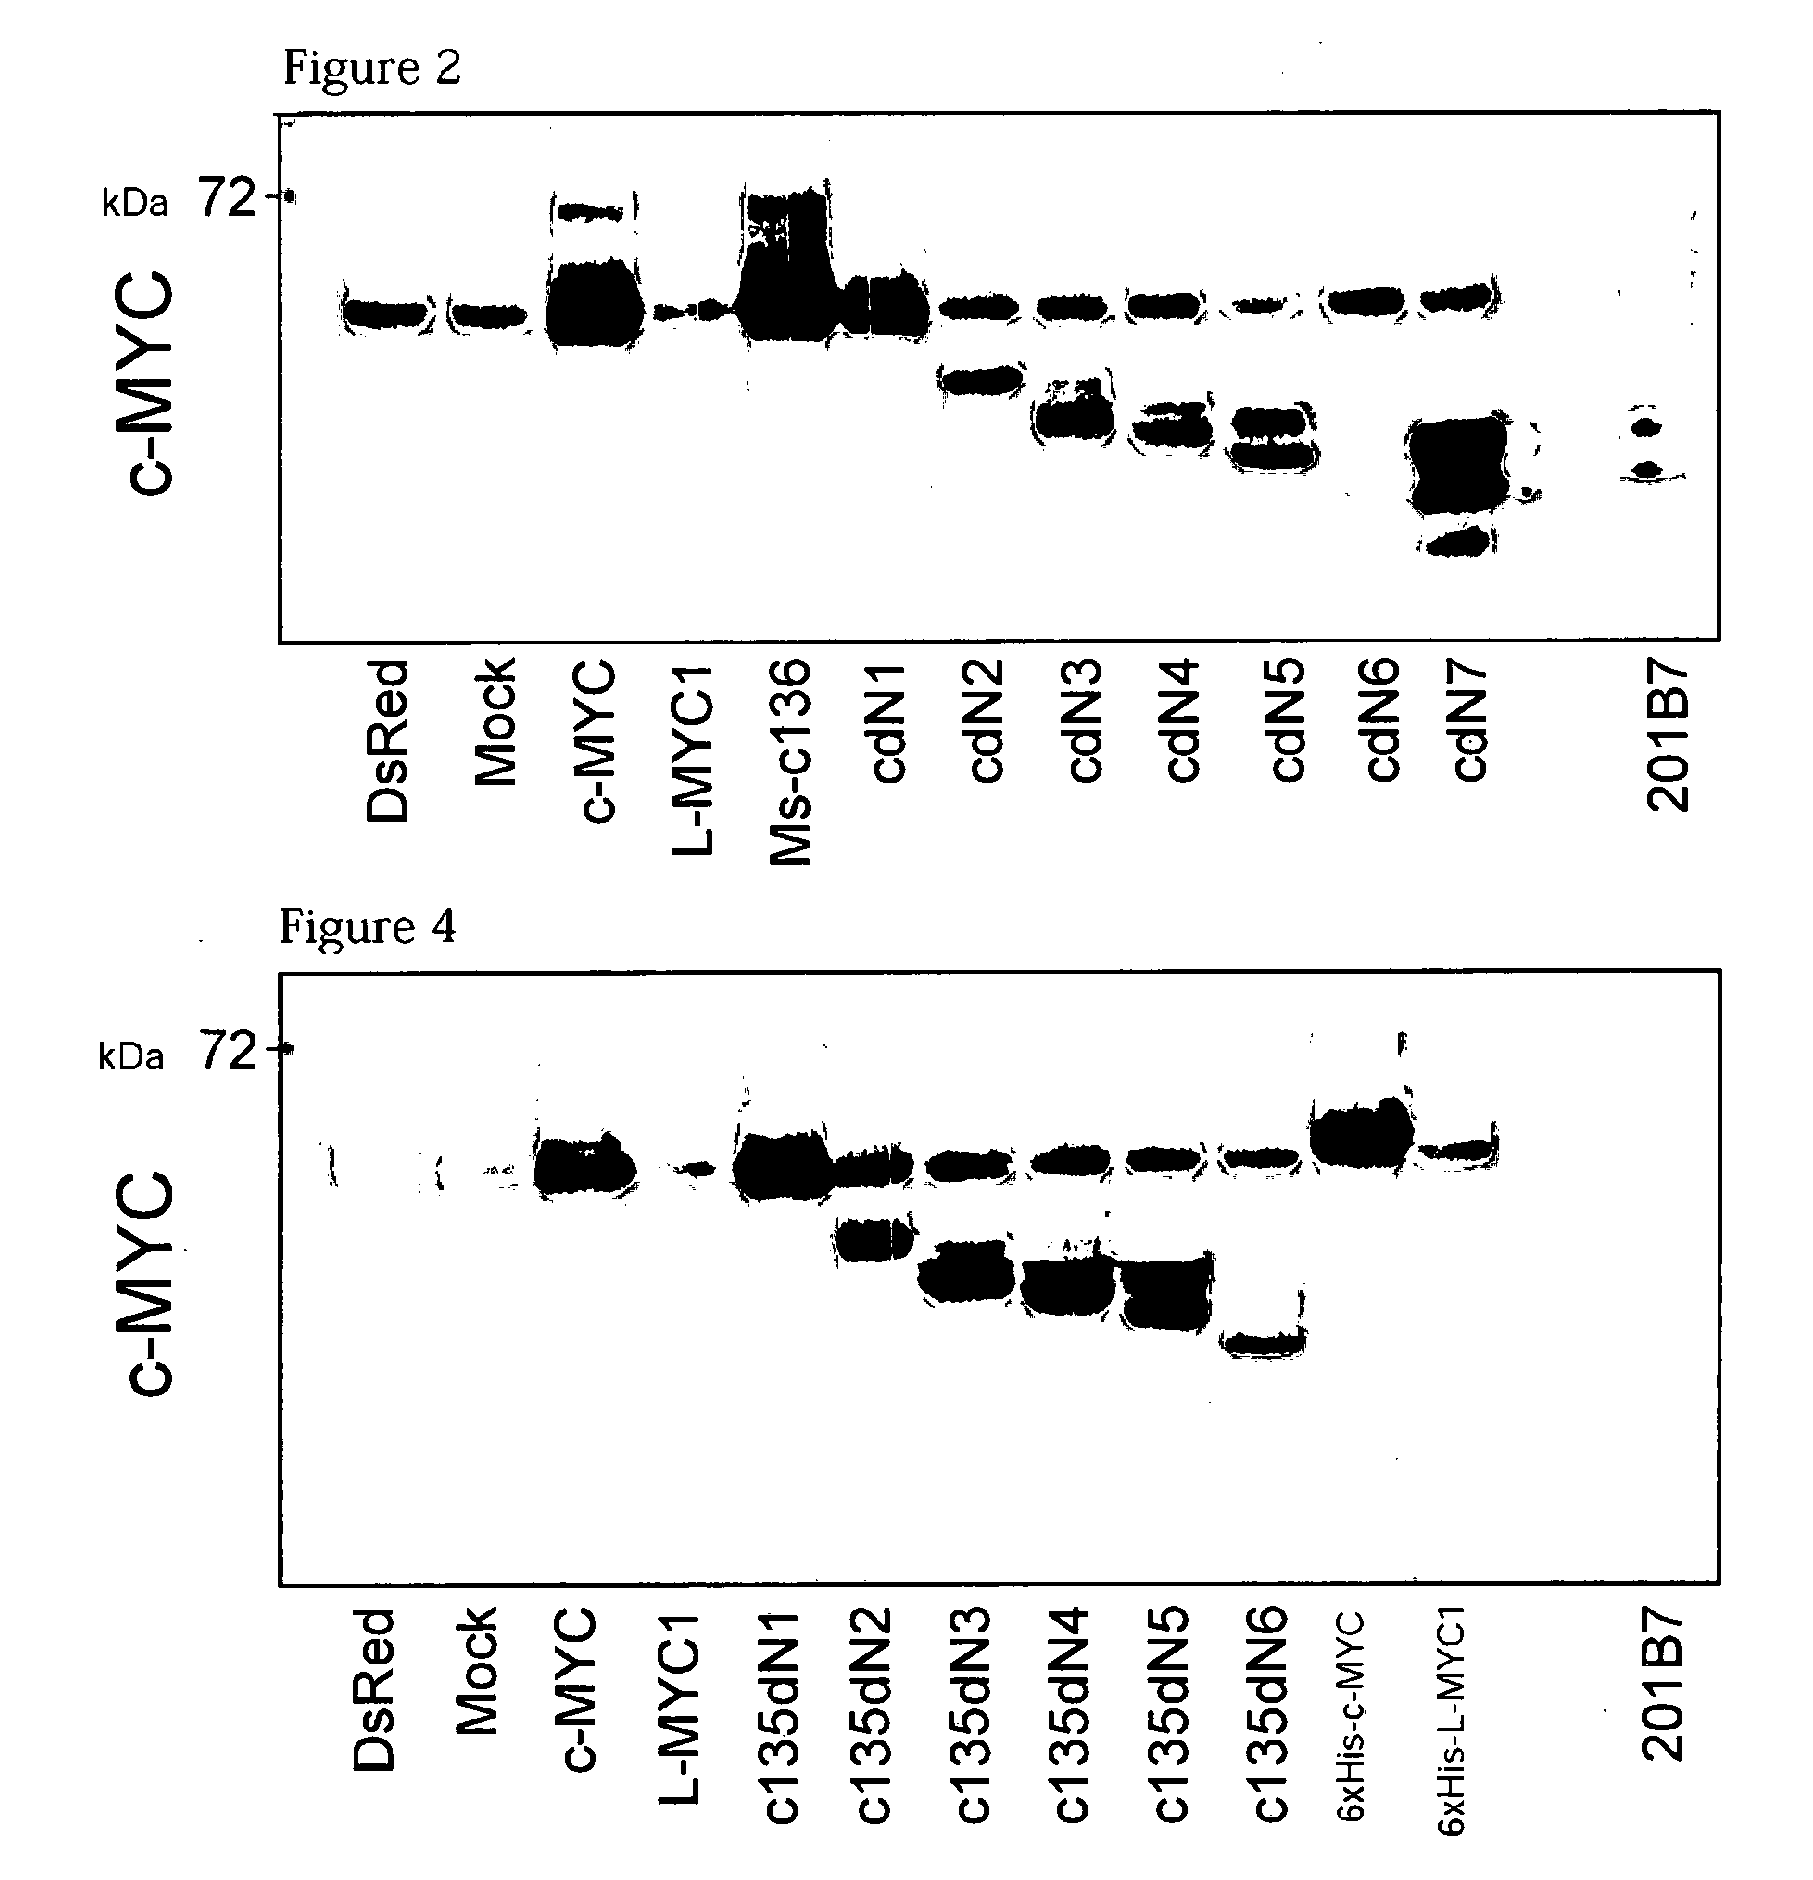 Method for improving induced pluripotent stem cell generation efficiency